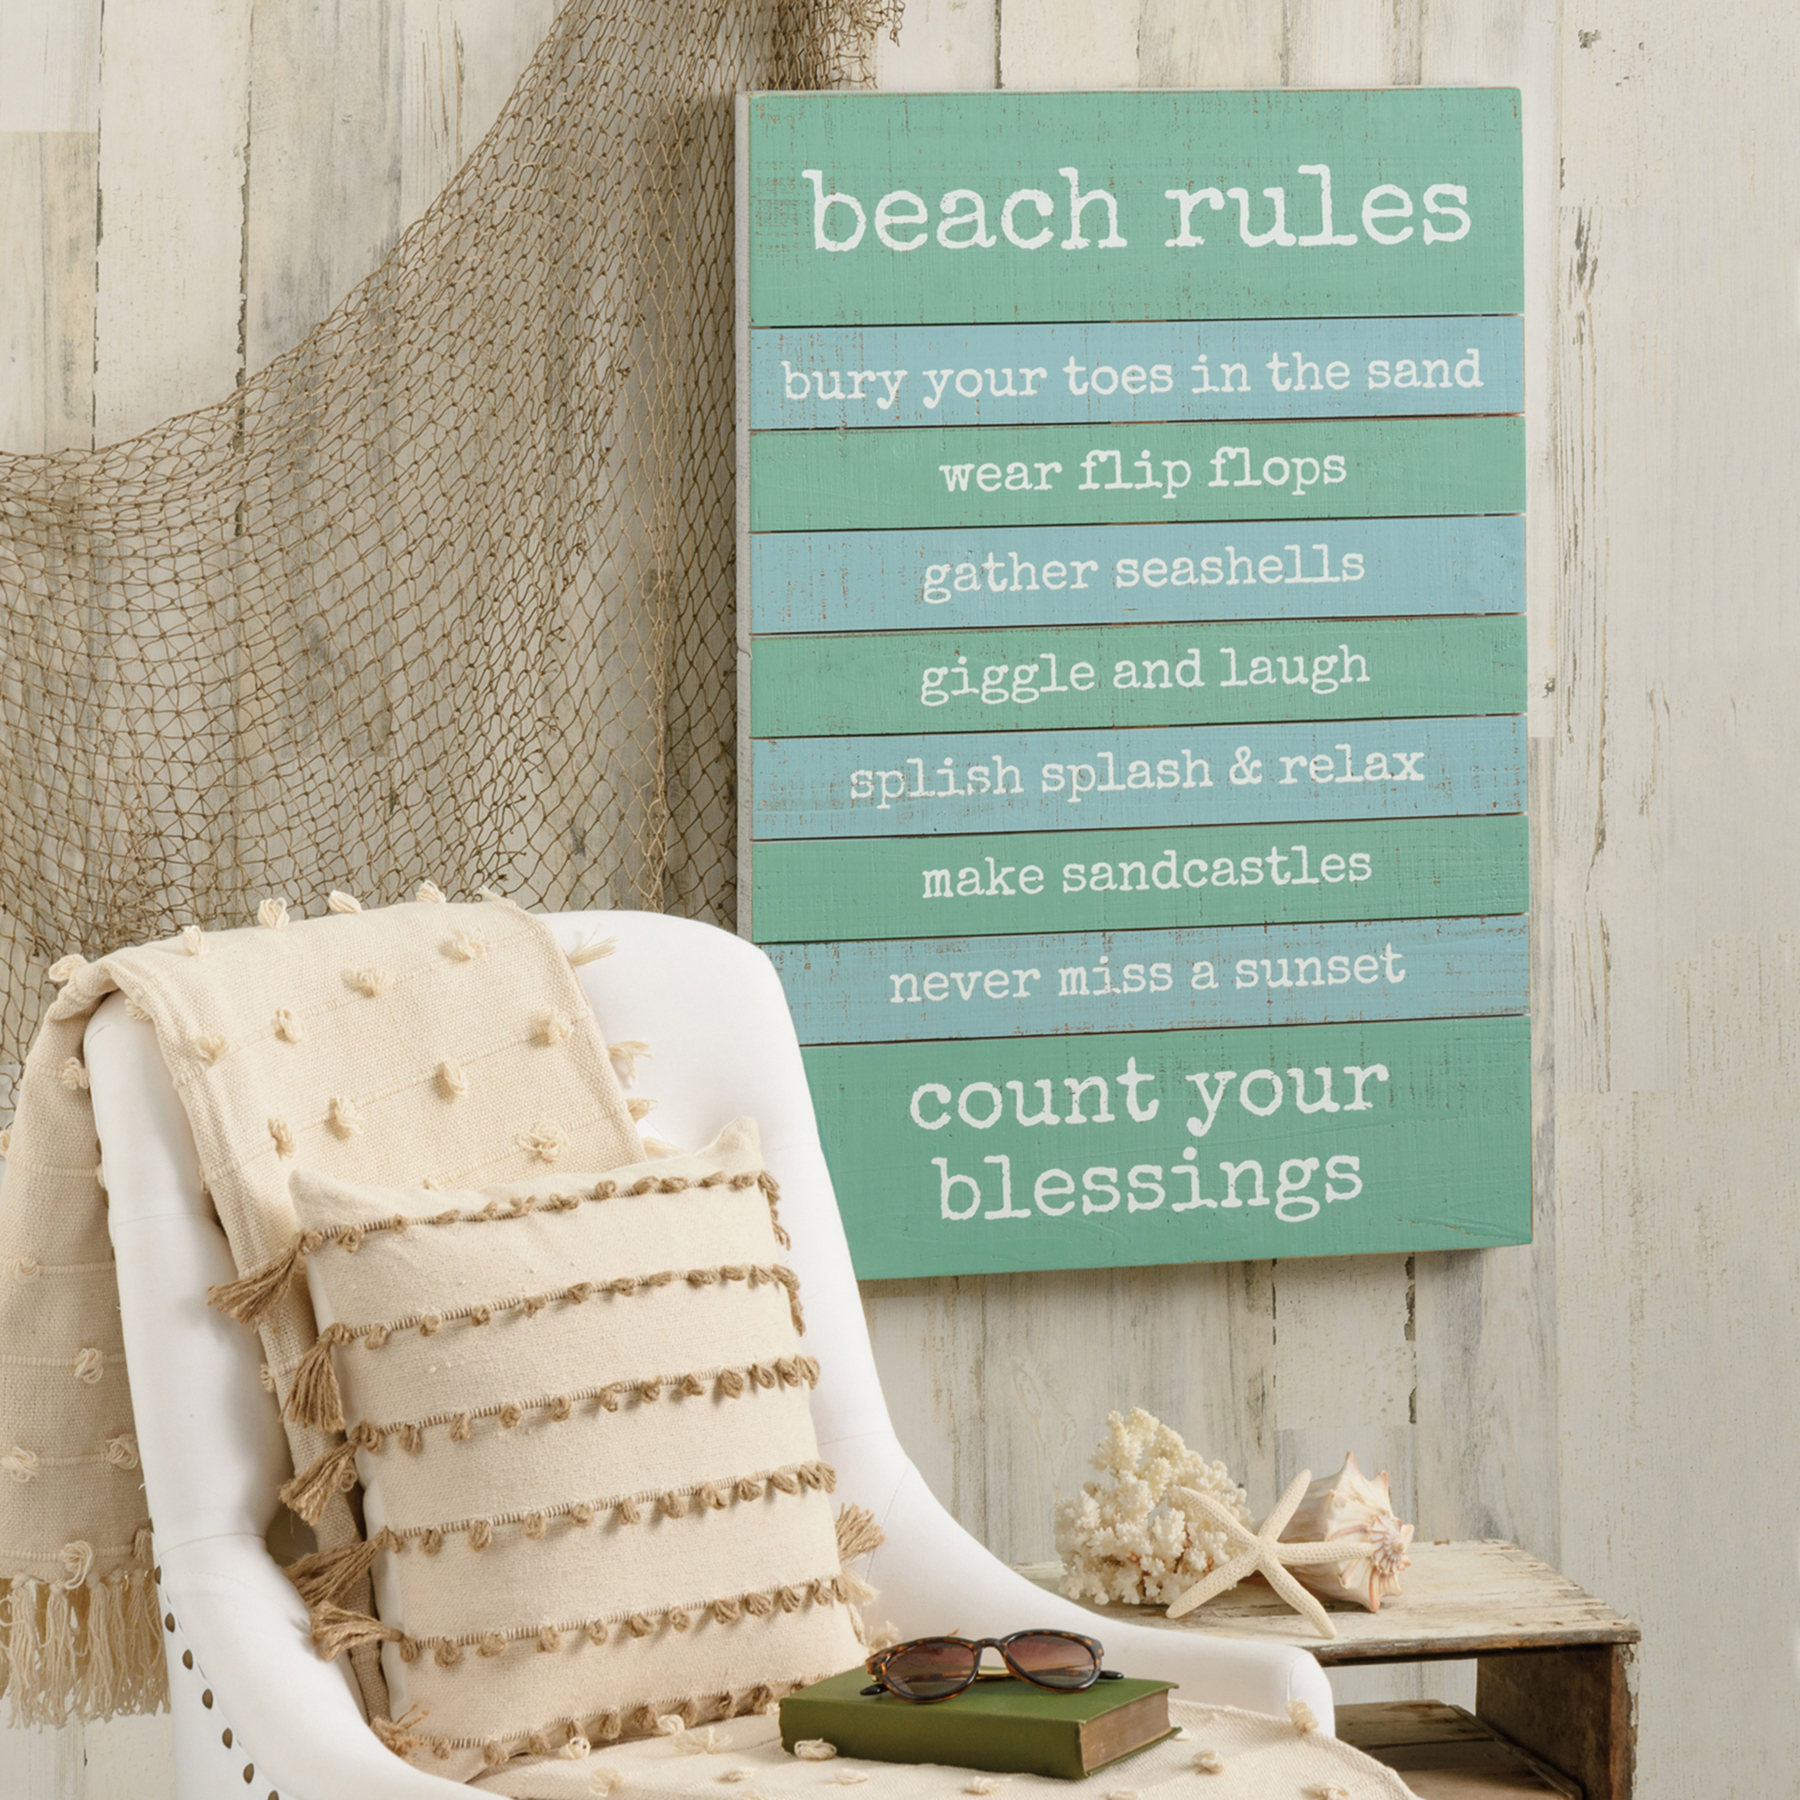 good luck not finishing the whole box in one beach day… #beachday #be